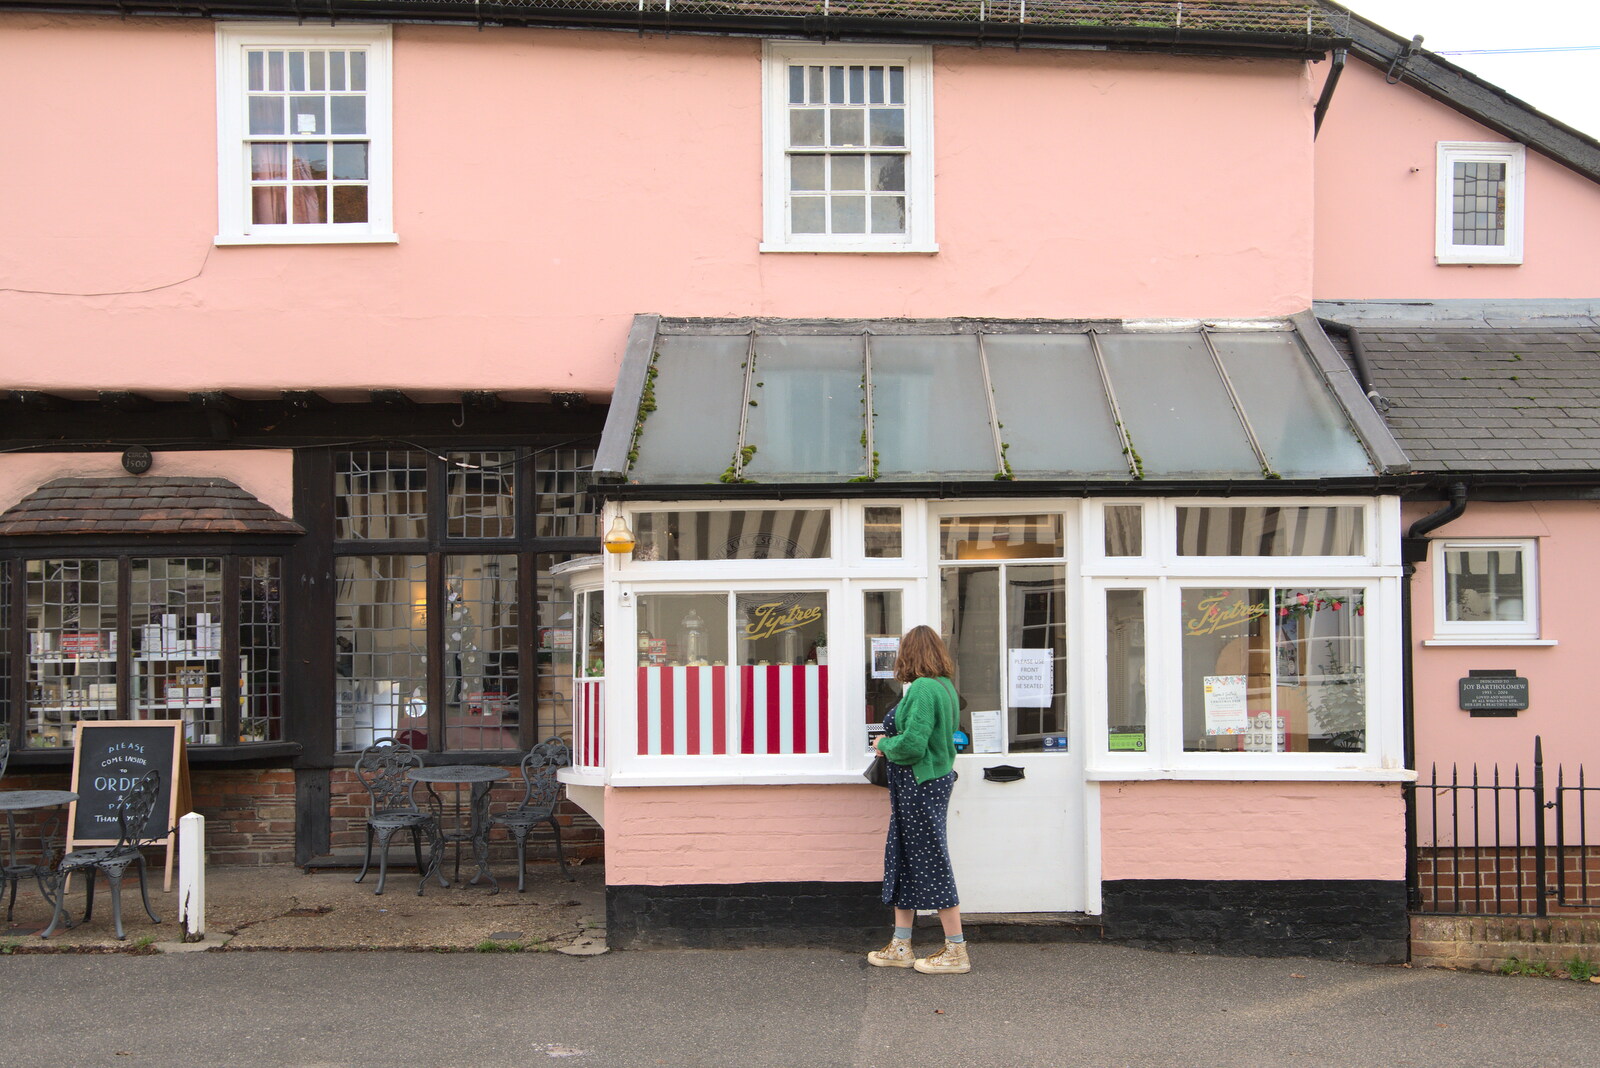 A Postcard from Flatford and Dedham, Suffolk and Essex, 9th November 2022: Isobel scopes out the Tea Shop over the road